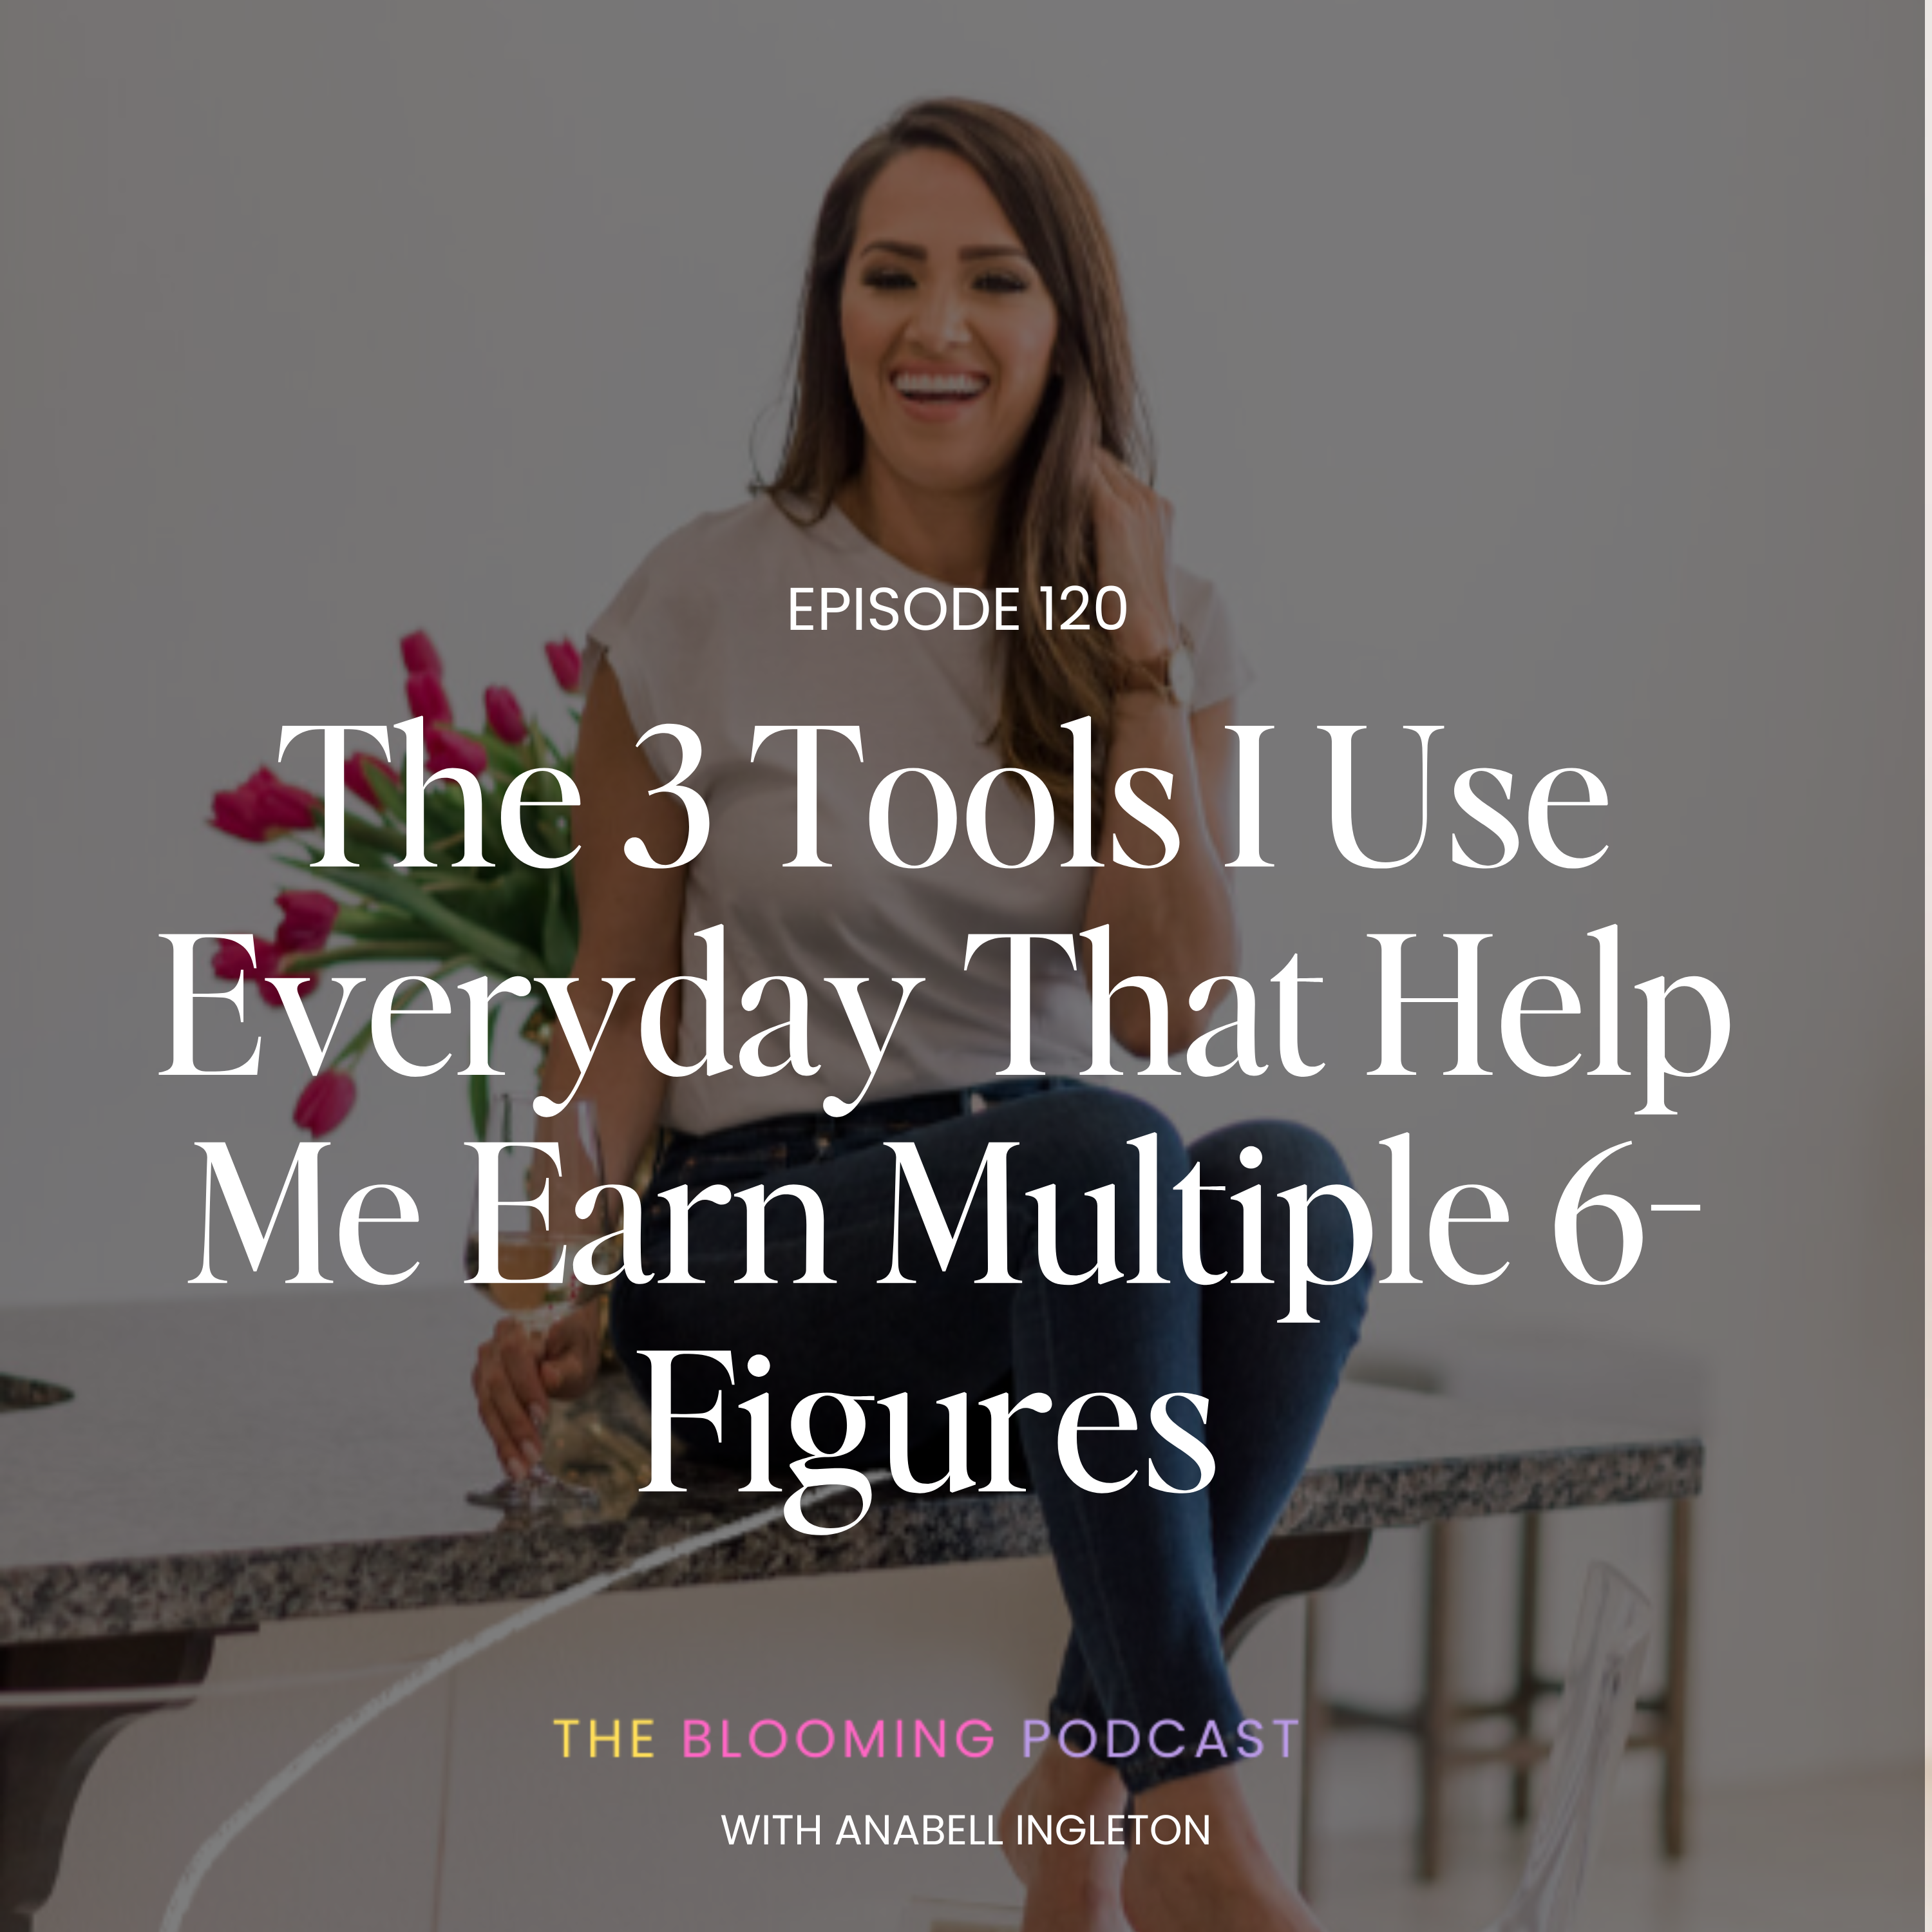 Episode 120 - The 3 Tools I Use Everyday That Help Me Earn Multiple 6 Figures